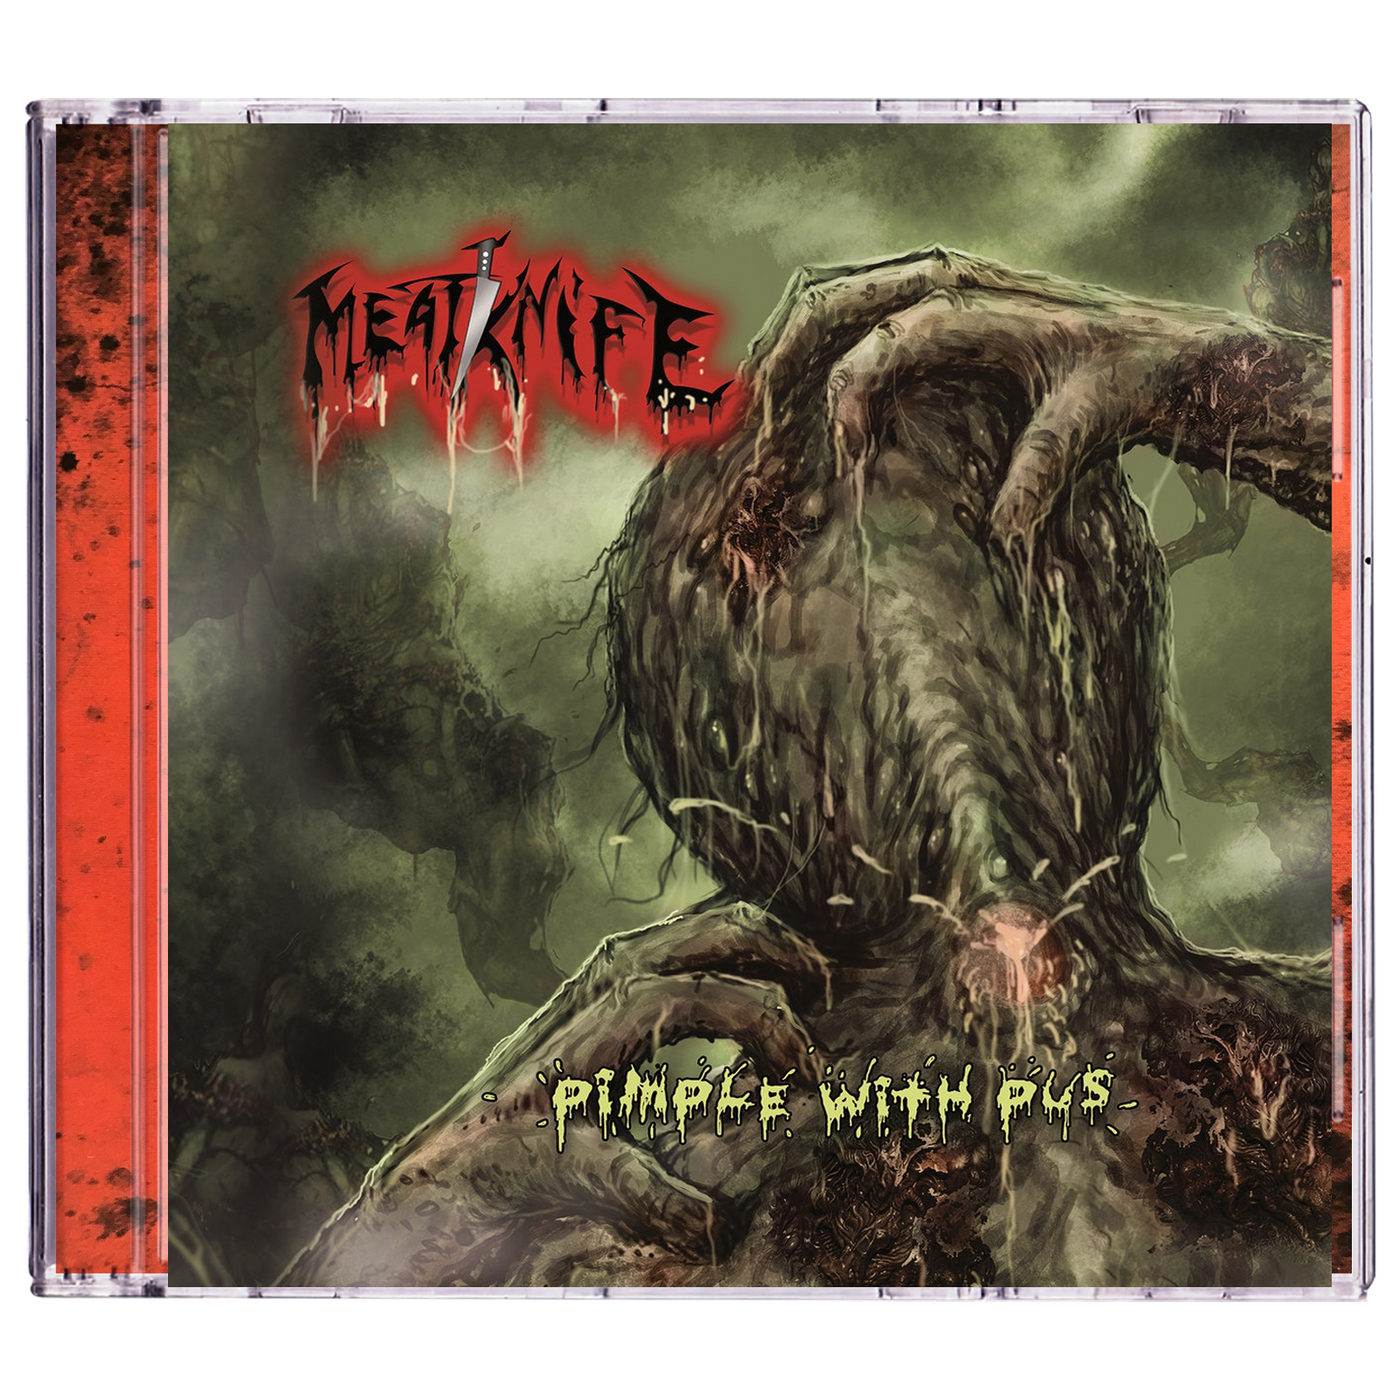 Meatknife 'Pimple With Pus' CD